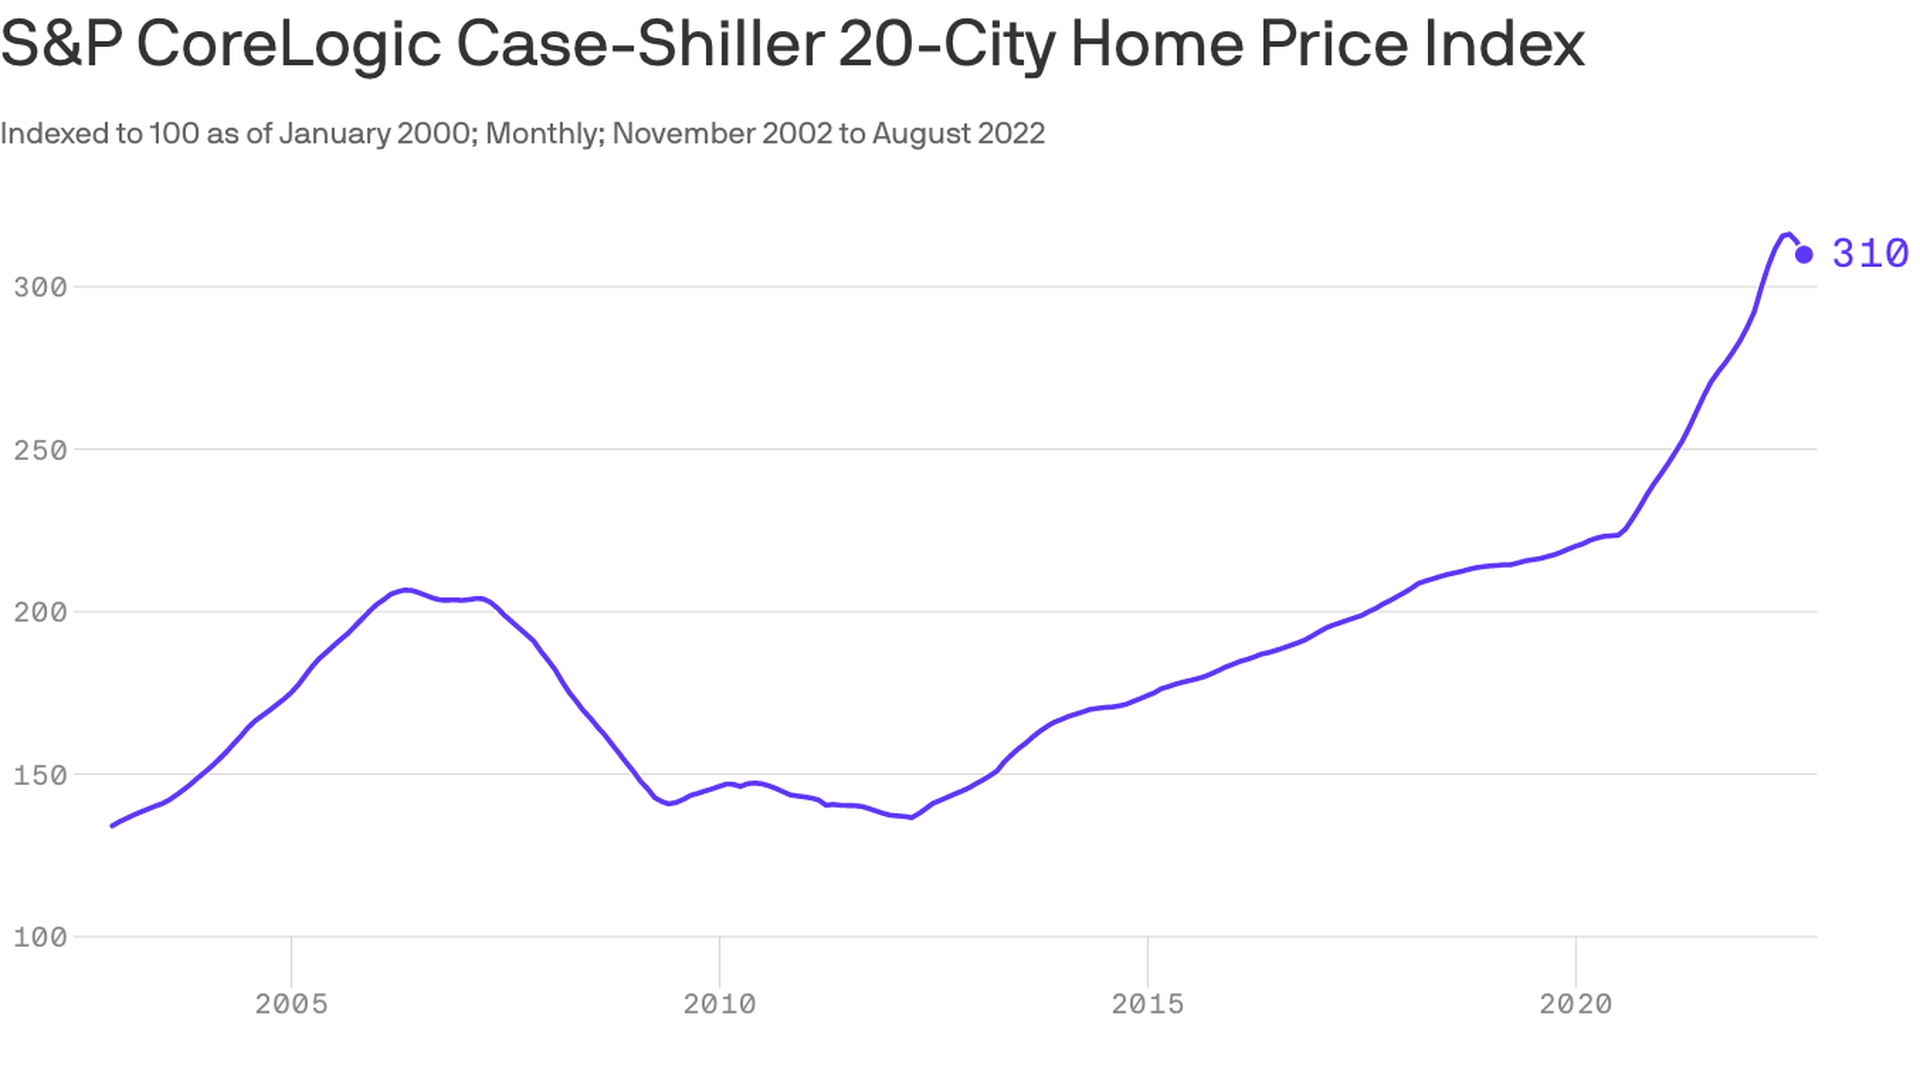 A chart showing S&P CoreLogic Case-Shiller 20-City Home Price Index